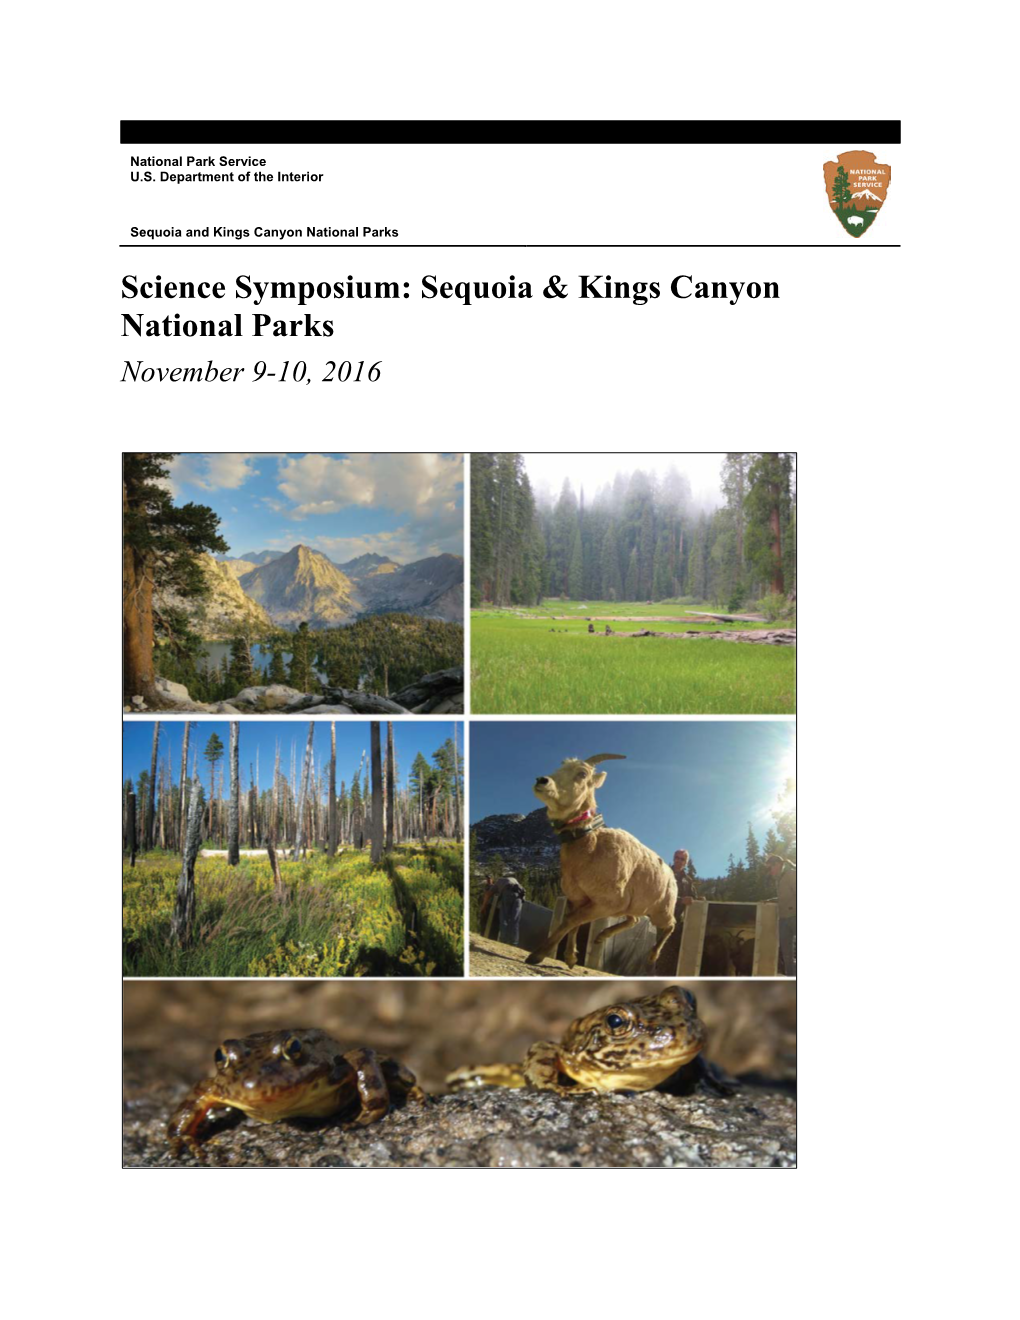 Science Symposium: Sequoia & Kings Canyon National Parks